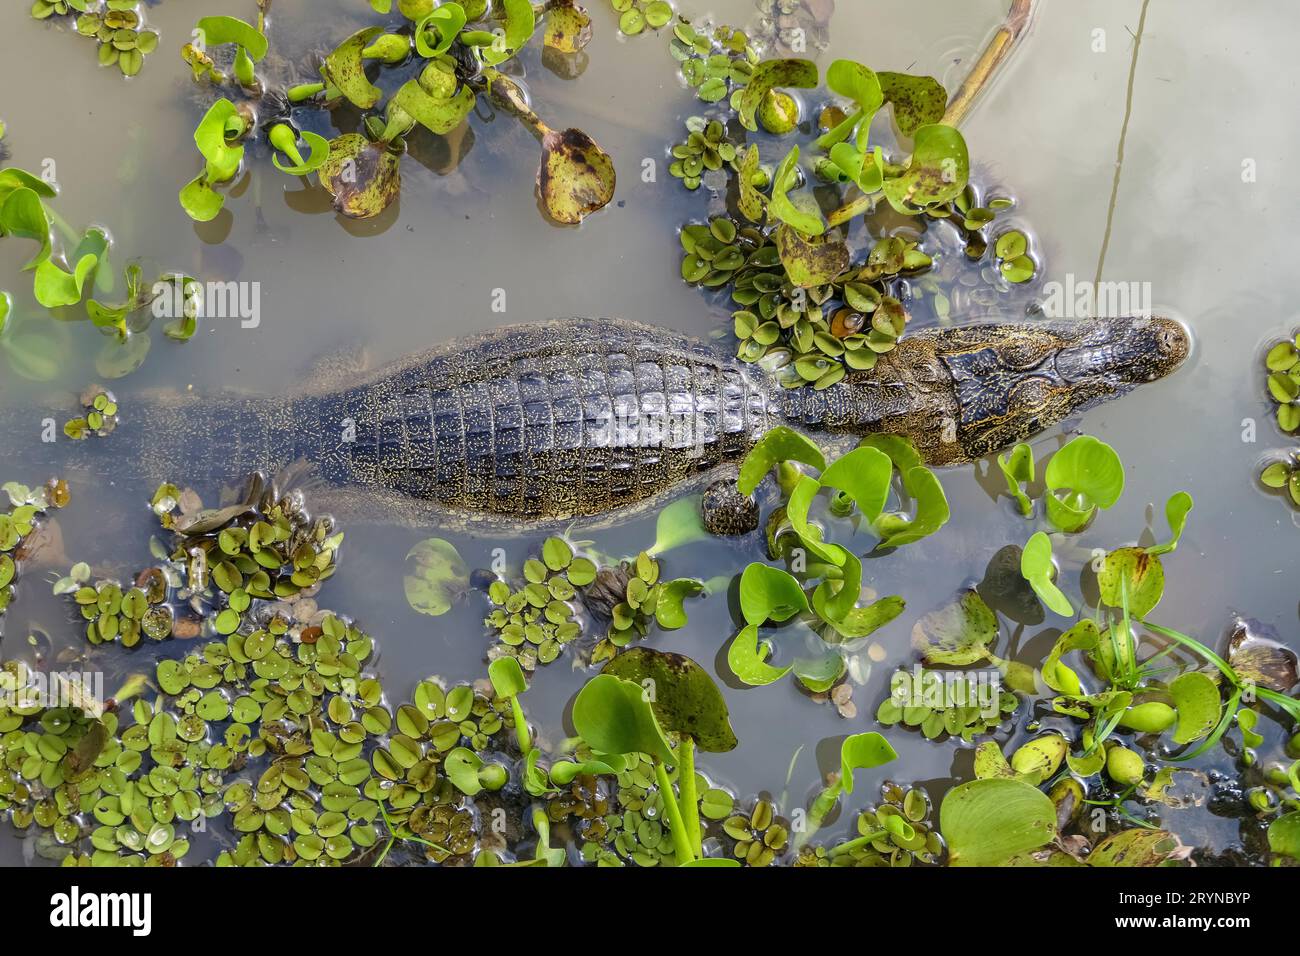 High angle view of a Yacare caiman in the water, Pantanal Wetlands, Mato Grosso, Brazil Stock Photo